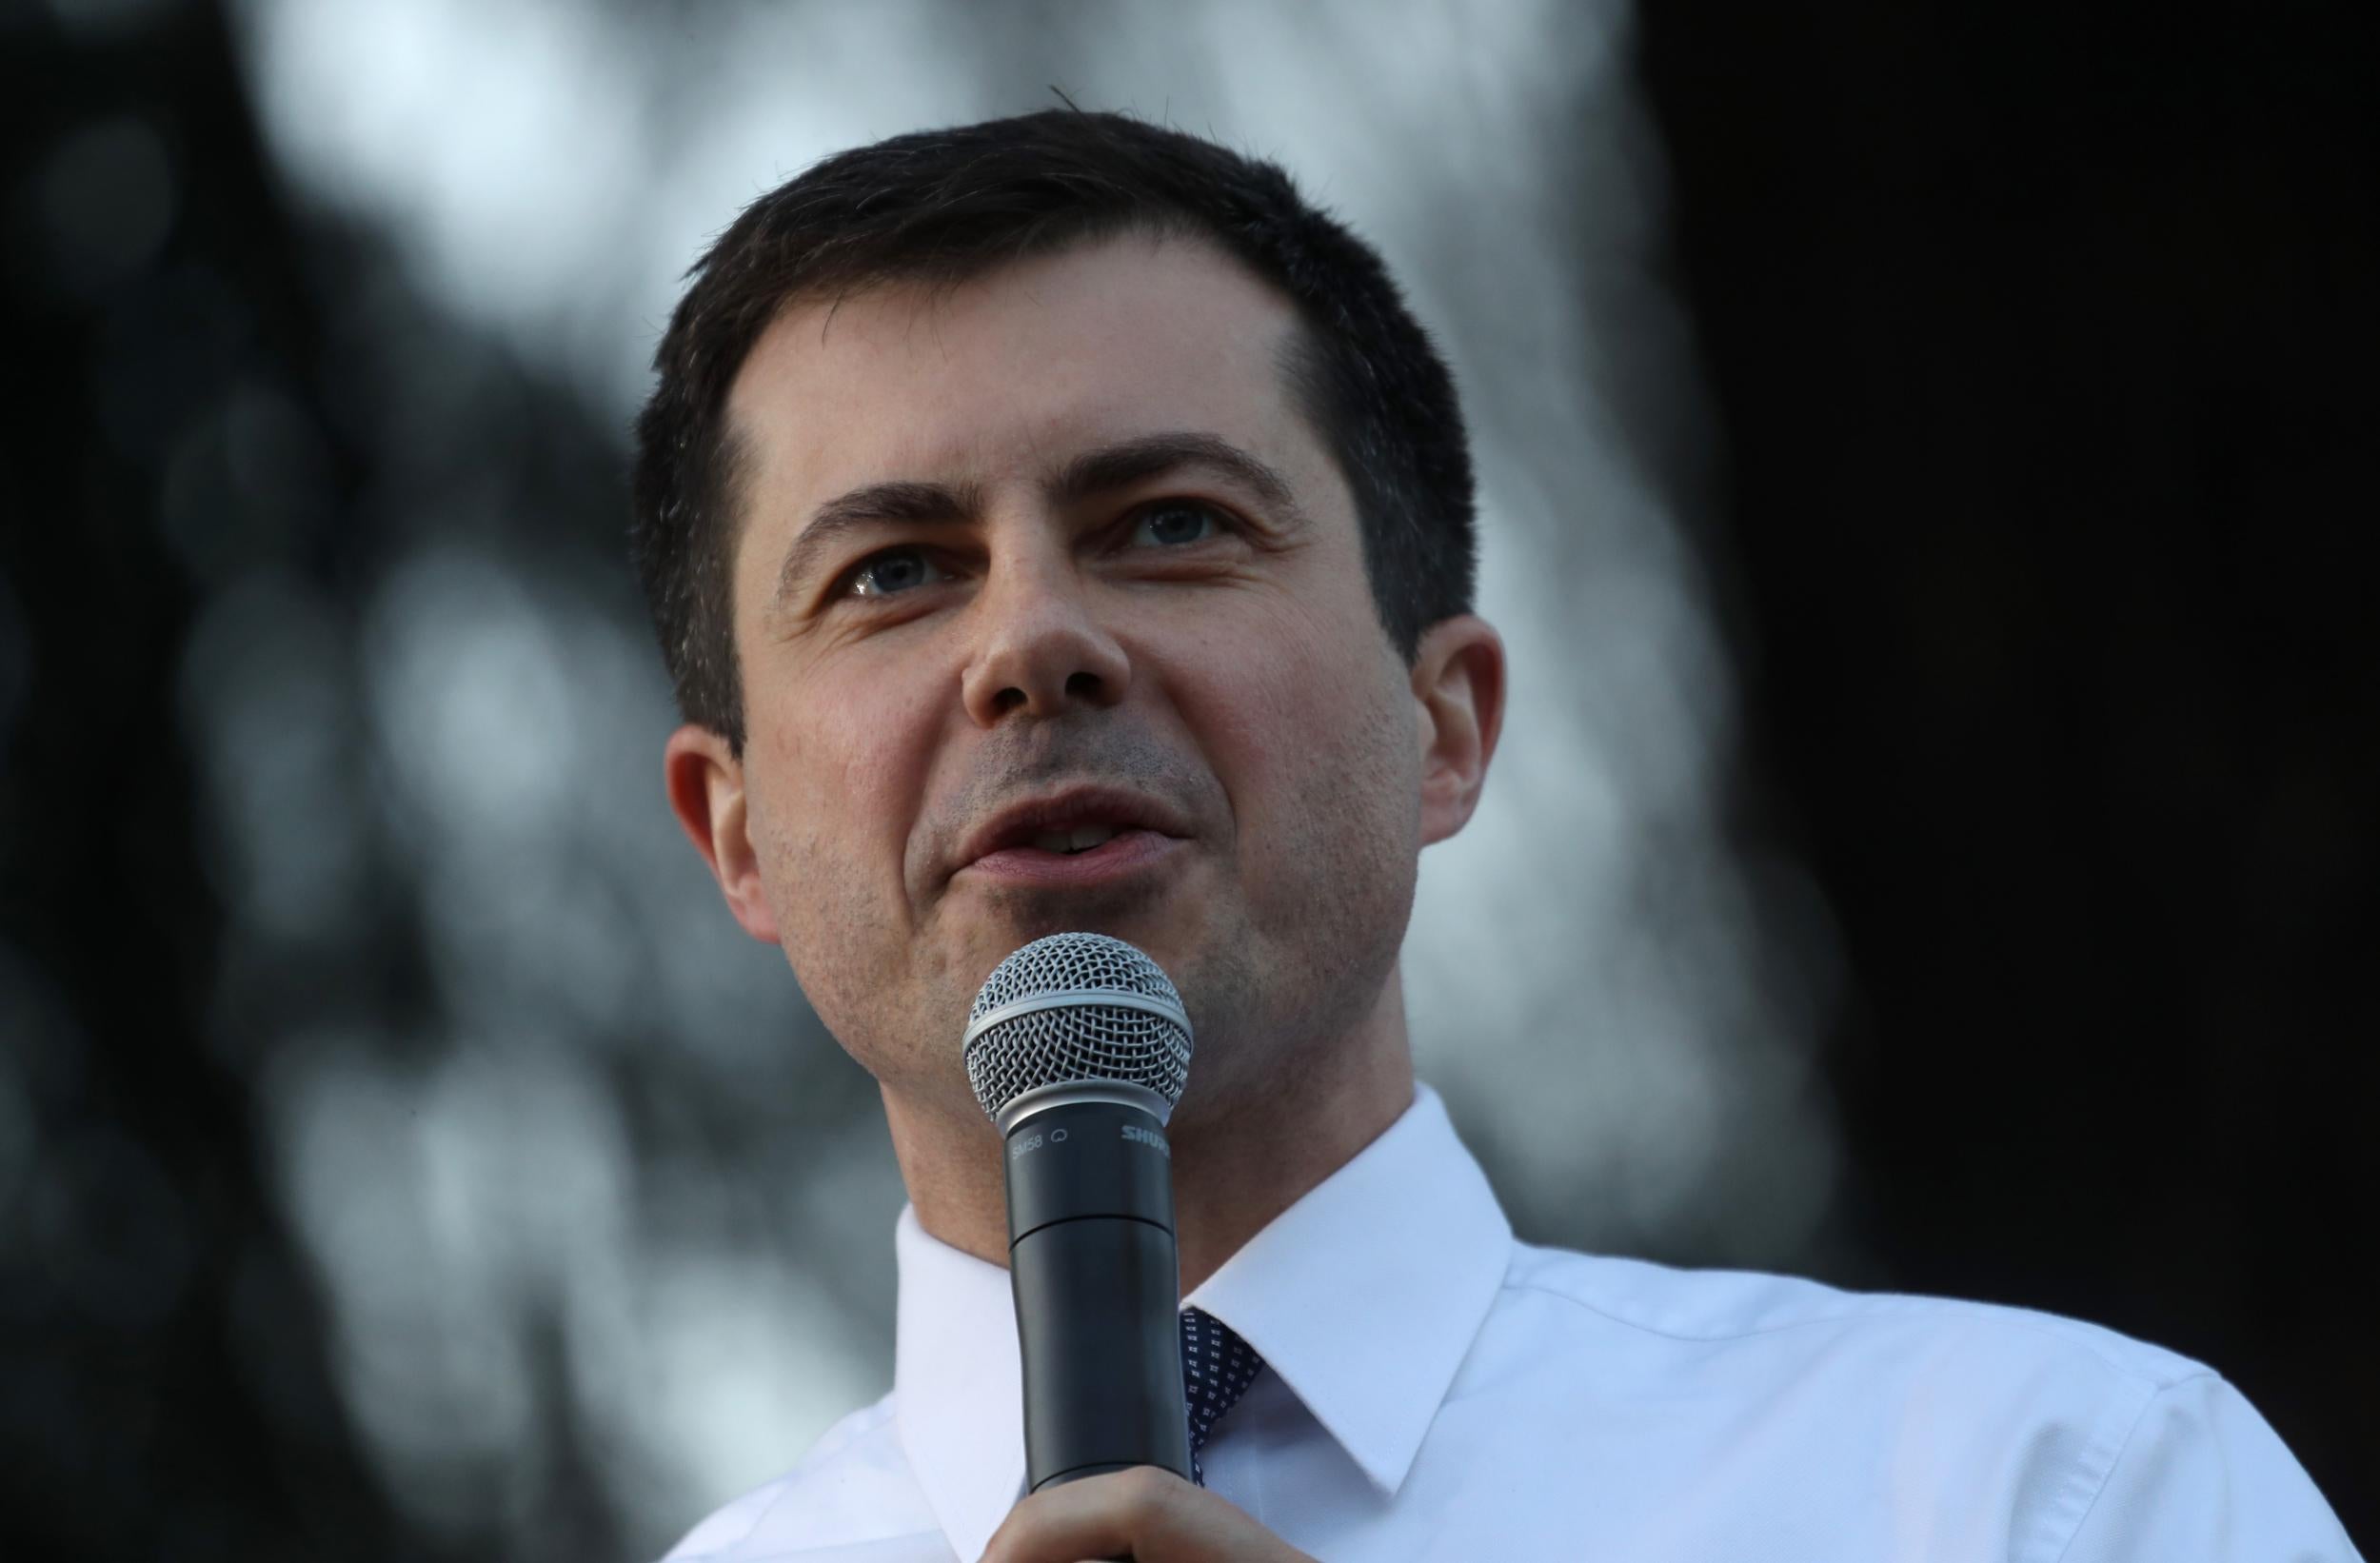 Pete Buttigieg 'deserving of death' for being gay, says top evangelical Christian website